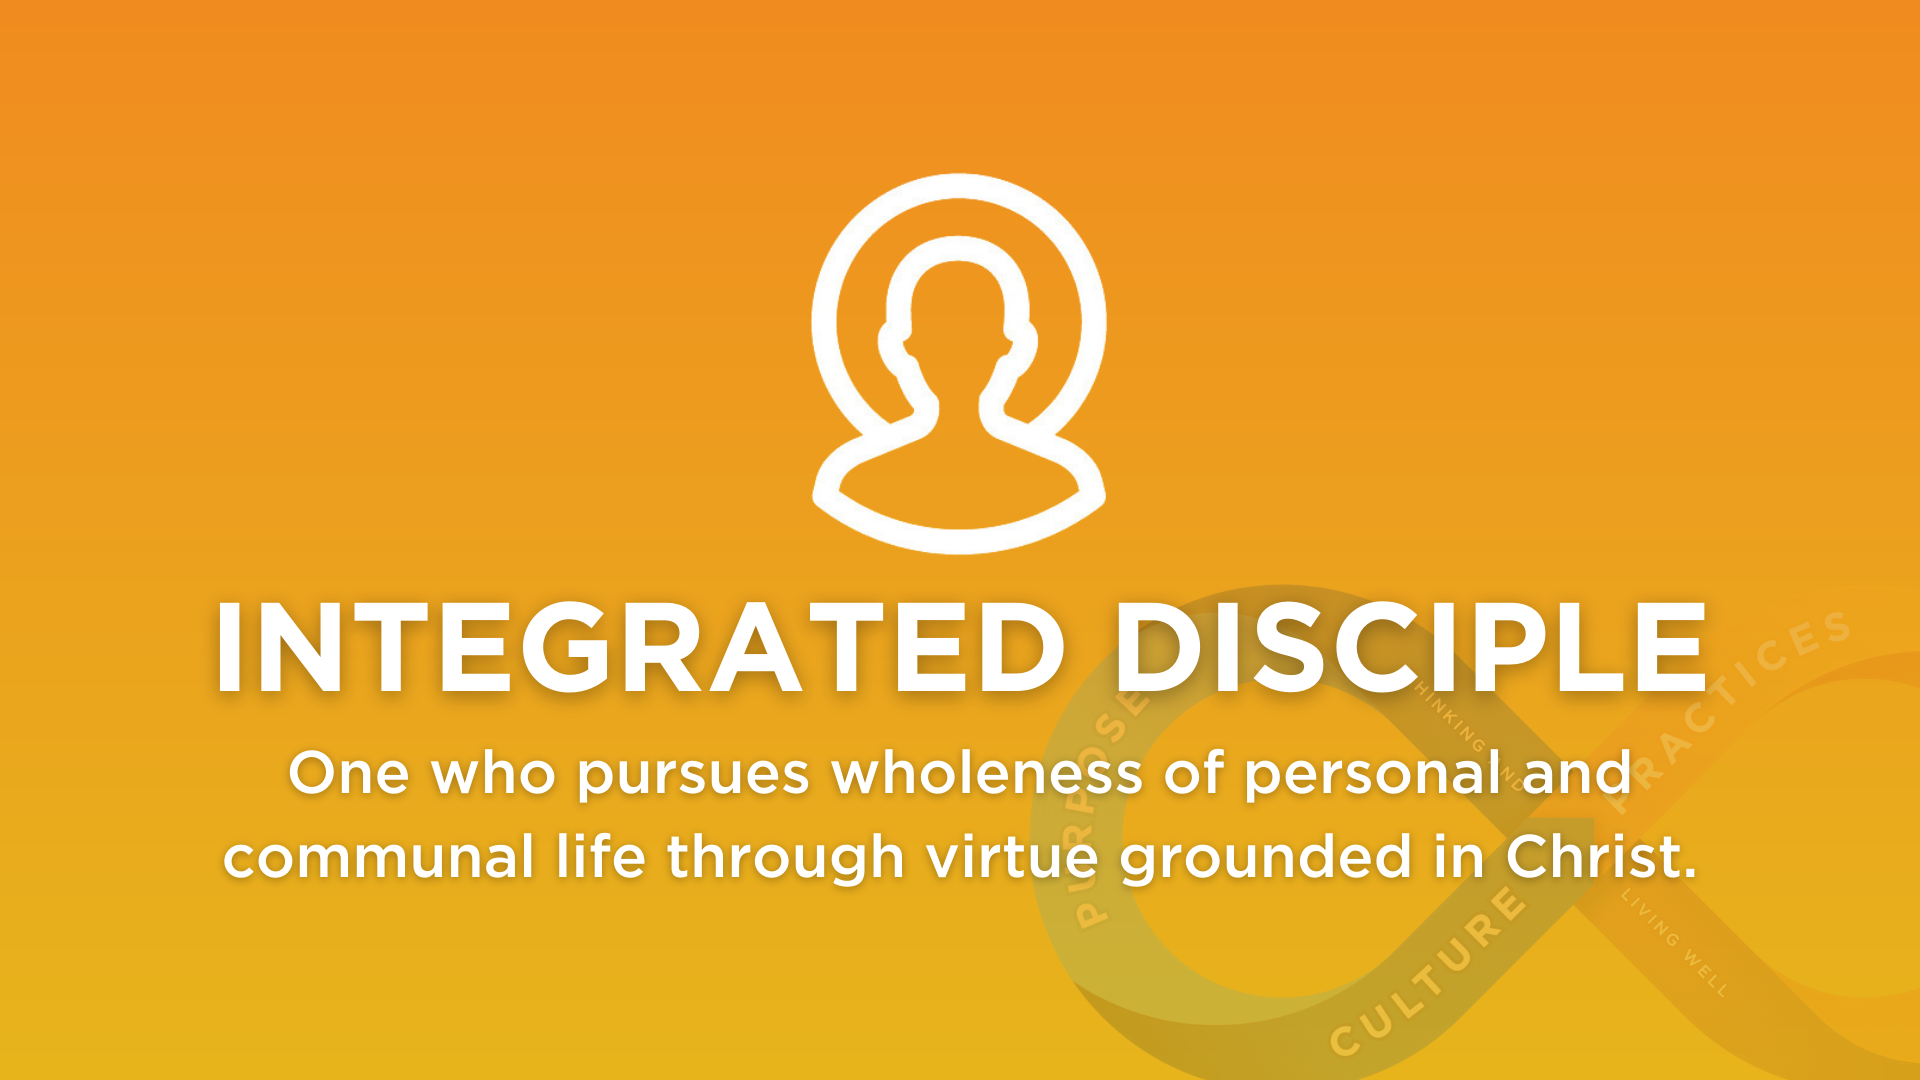 graphic for Integrated Disciple - One who pursues wholeness of personal and communal life through virtue grounded in Christ.